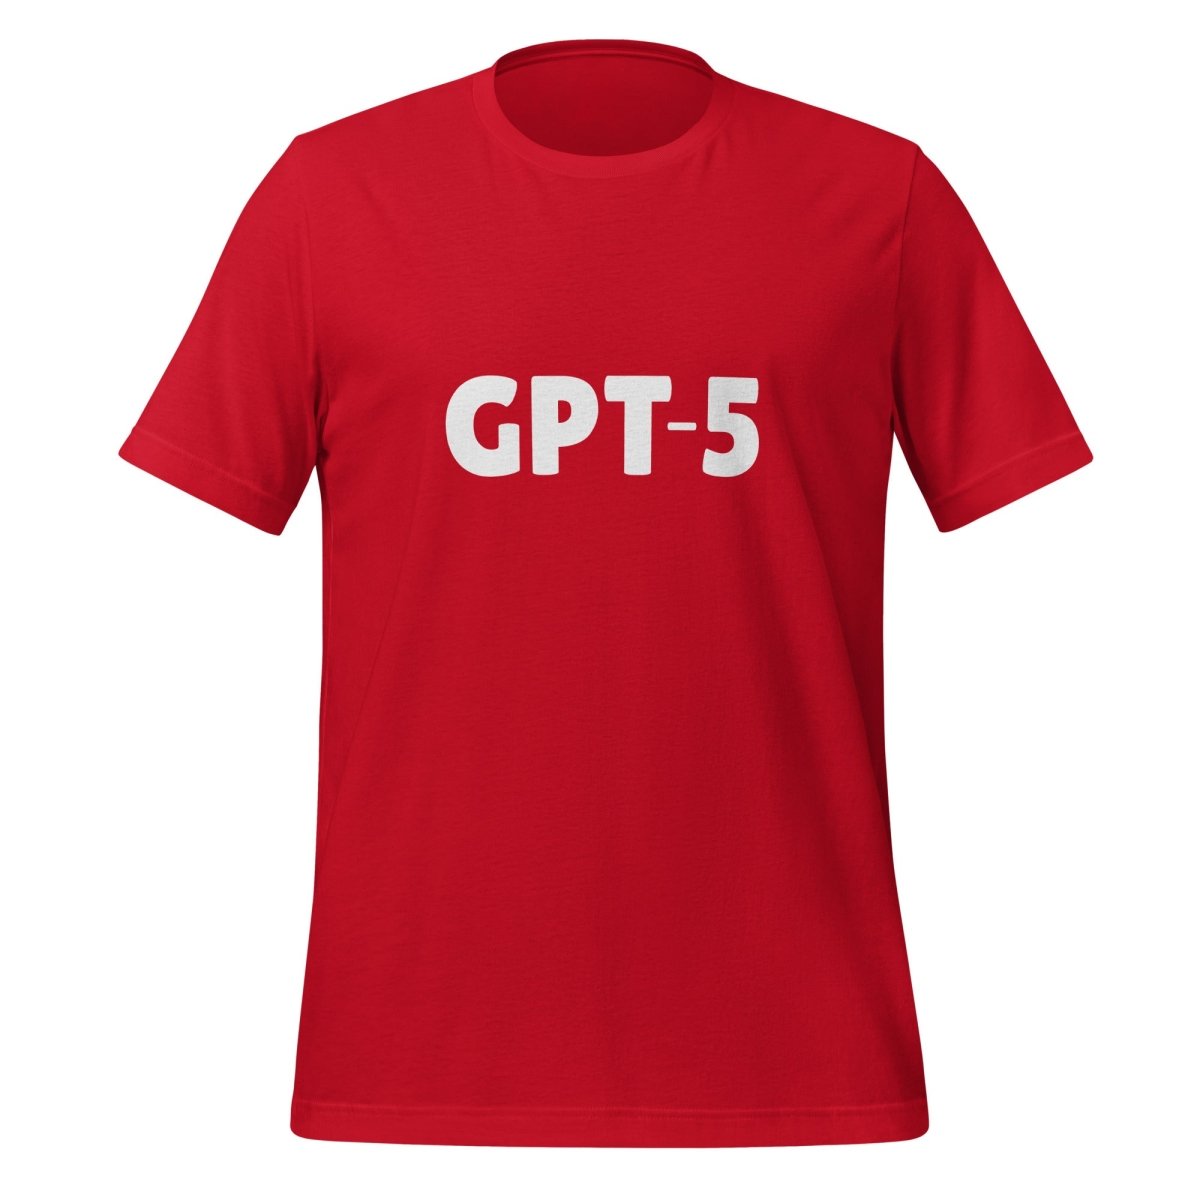 GPT - 5 T - Shirt 2 (unisex) - Red - AI Store